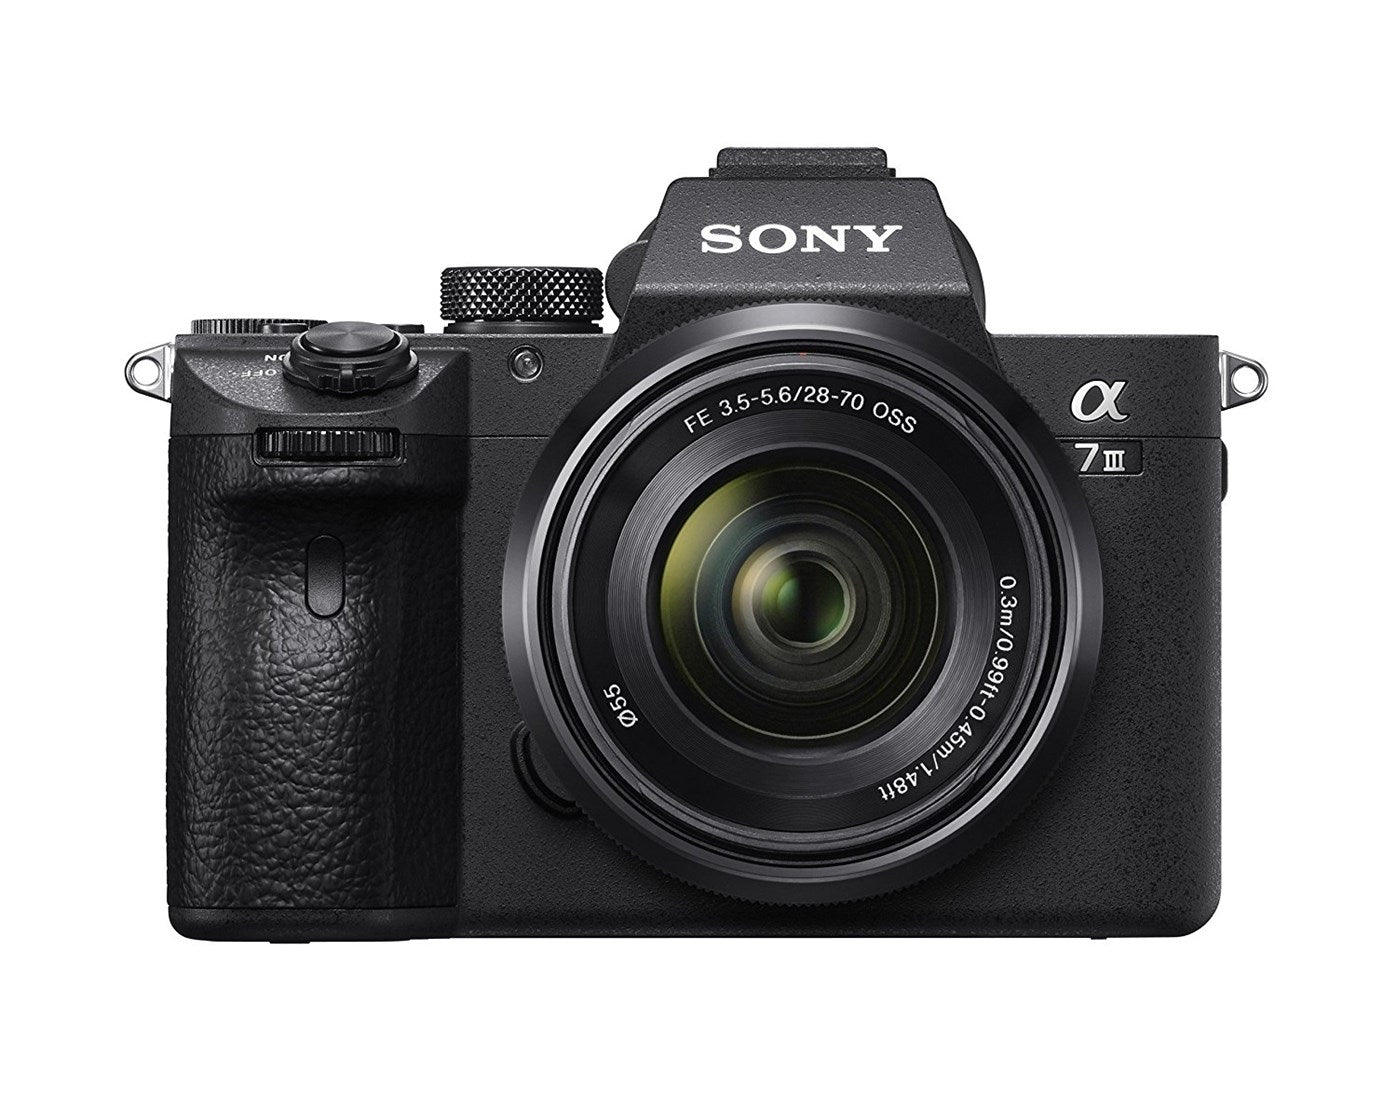 Product Image of Sony Alpha a7 III Full Frame Mirrorless Digital Camera with 28-70mm Lens Kit